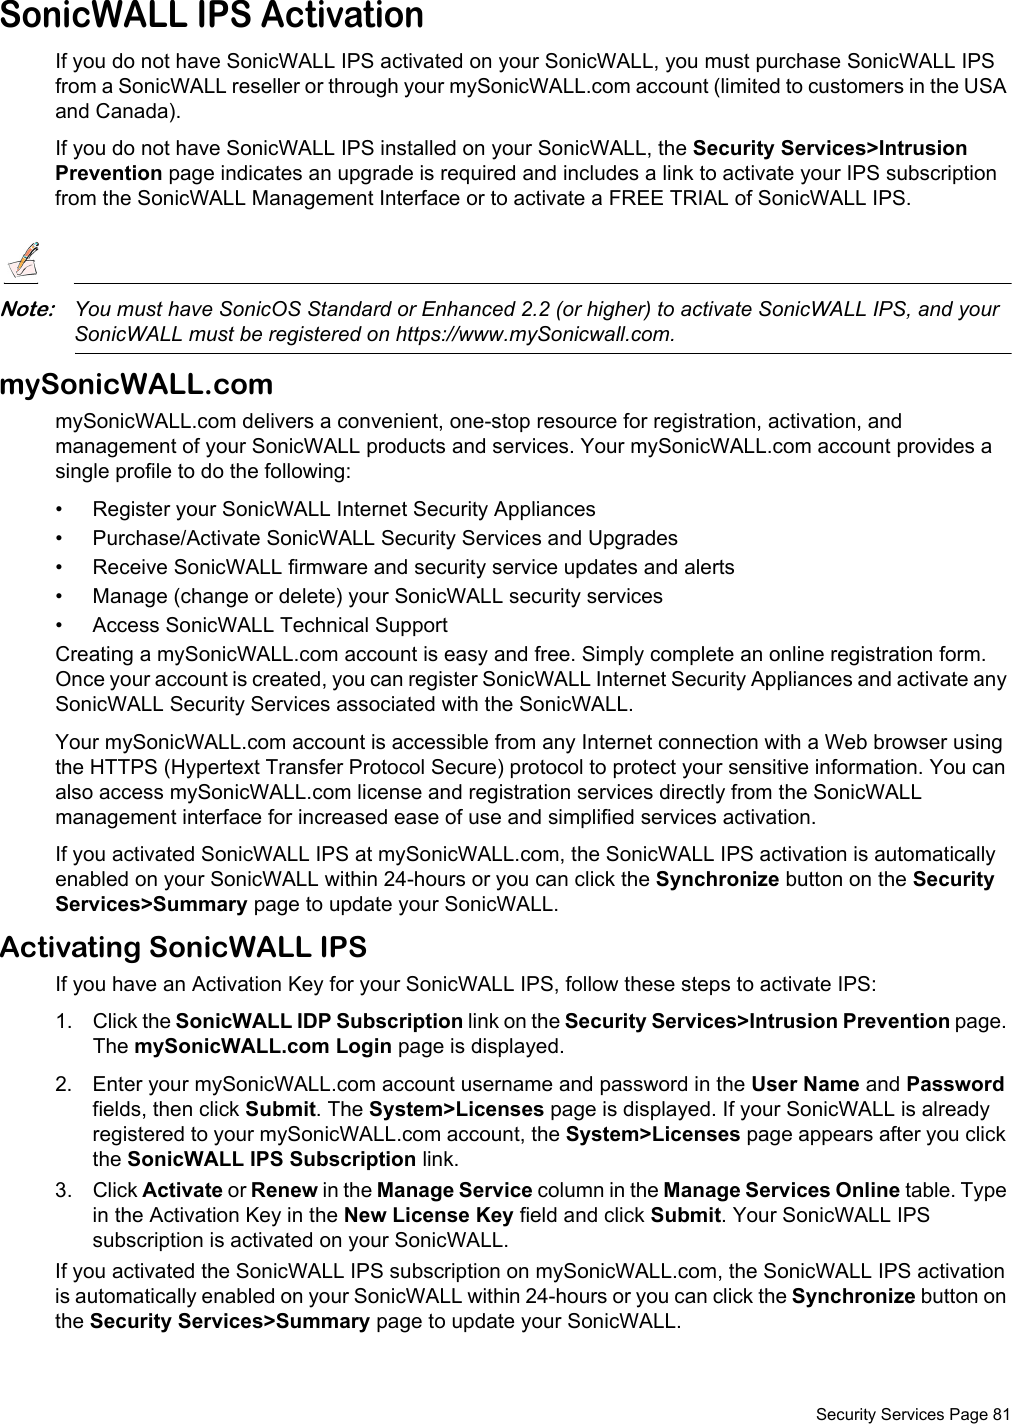  Security Services Page 81SonicWALL IPS ActivationIf you do not have SonicWALL IPS activated on your SonicWALL, you must purchase SonicWALL IPS from a SonicWALL reseller or through your mySonicWALL.com account (limited to customers in the USA and Canada).If you do not have SonicWALL IPS installed on your SonicWALL, the Security Services&gt;Intrusion Prevention page indicates an upgrade is required and includes a link to activate your IPS subscription from the SonicWALL Management Interface or to activate a FREE TRIAL of SonicWALL IPS.Note:You must have SonicOS Standard or Enhanced 2.2 (or higher) to activate SonicWALL IPS, and your SonicWALL must be registered on https://www.mySonicwall.com.mySonicWALL.commySonicWALL.com delivers a convenient, one-stop resource for registration, activation, and management of your SonicWALL products and services. Your mySonicWALL.com account provides a single profile to do the following:• Register your SonicWALL Internet Security Appliances• Purchase/Activate SonicWALL Security Services and Upgrades• Receive SonicWALL firmware and security service updates and alerts• Manage (change or delete) your SonicWALL security services• Access SonicWALL Technical SupportCreating a mySonicWALL.com account is easy and free. Simply complete an online registration form. Once your account is created, you can register SonicWALL Internet Security Appliances and activate any SonicWALL Security Services associated with the SonicWALL.Your mySonicWALL.com account is accessible from any Internet connection with a Web browser using the HTTPS (Hypertext Transfer Protocol Secure) protocol to protect your sensitive information. You can also access mySonicWALL.com license and registration services directly from the SonicWALL management interface for increased ease of use and simplified services activation.If you activated SonicWALL IPS at mySonicWALL.com, the SonicWALL IPS activation is automatically enabled on your SonicWALL within 24-hours or you can click the Synchronize button on the Security Services&gt;Summary page to update your SonicWALL.Activating SonicWALL IPSIf you have an Activation Key for your SonicWALL IPS, follow these steps to activate IPS:1. Click the SonicWALL IDP Subscription link on the Security Services&gt;Intrusion Prevention page. The mySonicWALL.com Login page is displayed. 2. Enter your mySonicWALL.com account username and password in the User Name and Password fields, then click Submit. The System&gt;Licenses page is displayed. If your SonicWALL is already registered to your mySonicWALL.com account, the System&gt;Licenses page appears after you click the SonicWALL IPS Subscription link. 3. Click Activate or Renew in the Manage Service column in the Manage Services Online table. Type in the Activation Key in the New License Key field and click Submit. Your SonicWALL IPS subscription is activated on your SonicWALL.If you activated the SonicWALL IPS subscription on mySonicWALL.com, the SonicWALL IPS activation is automatically enabled on your SonicWALL within 24-hours or you can click the Synchronize button on the Security Services&gt;Summary page to update your SonicWALL.